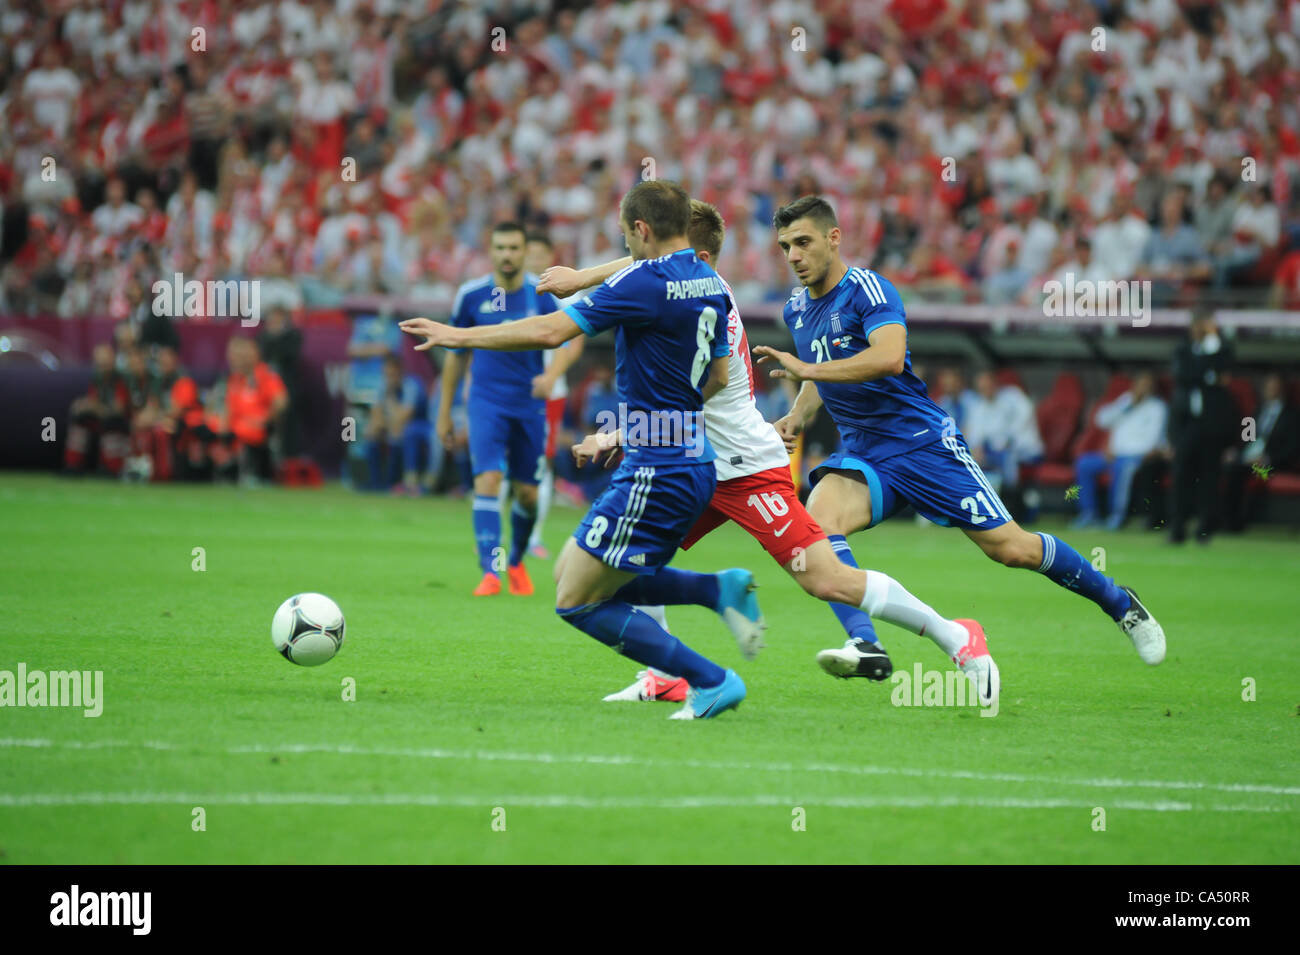 08.06.2012 Warsaw, Poland. Jakub Błaszczykowski (Borussia Dortmund) in action for Poland during the European Championship Group A game between Poland and Greece from the National Stadium. Stock Photo